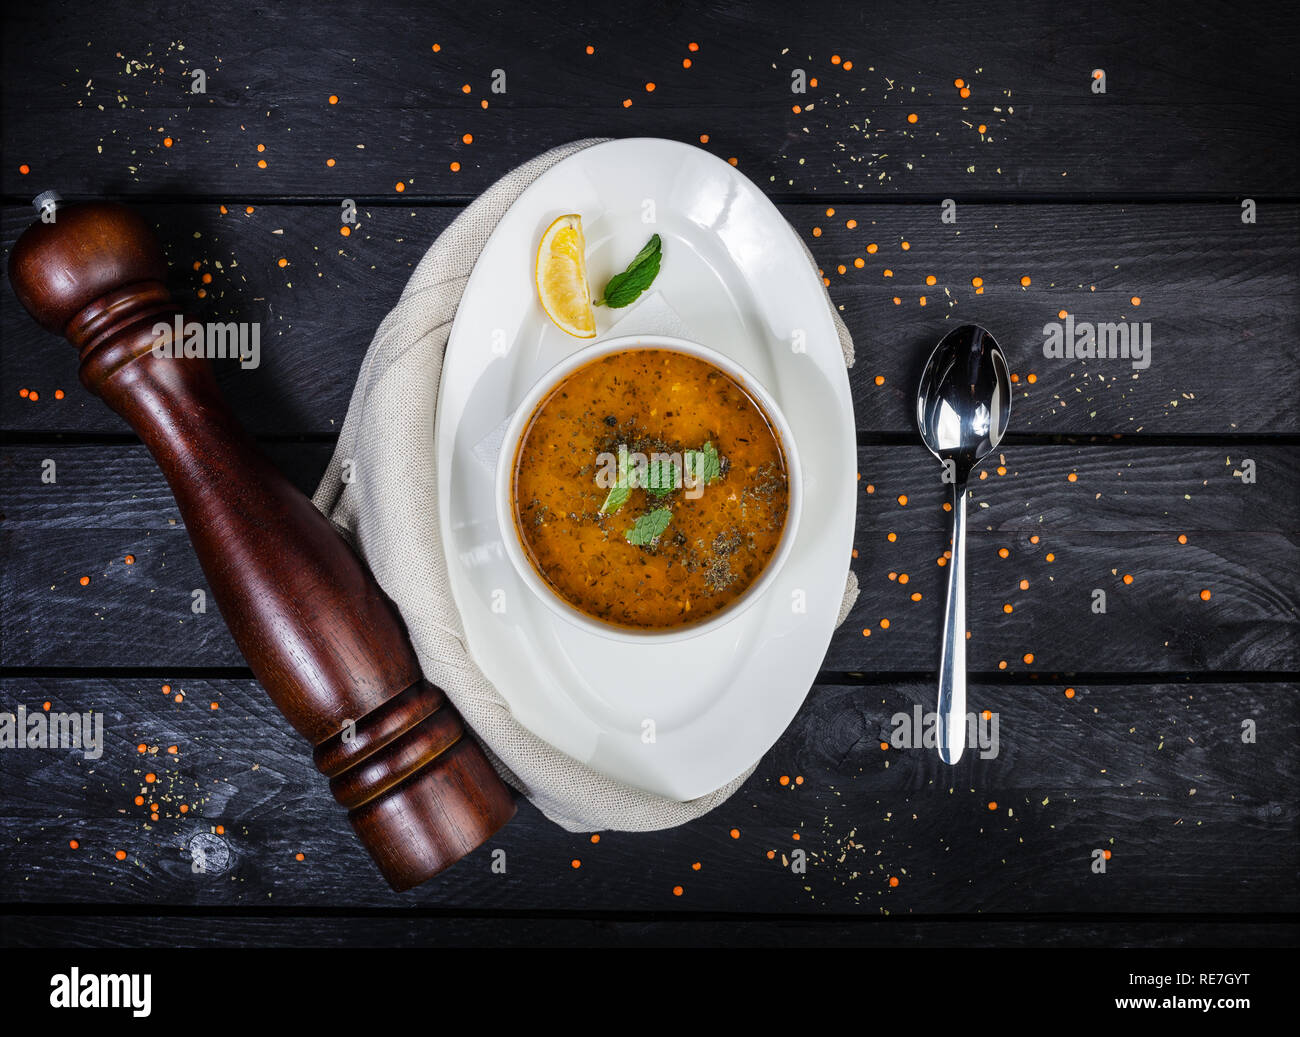 Red lentil soup served in white bowl Stock Photo